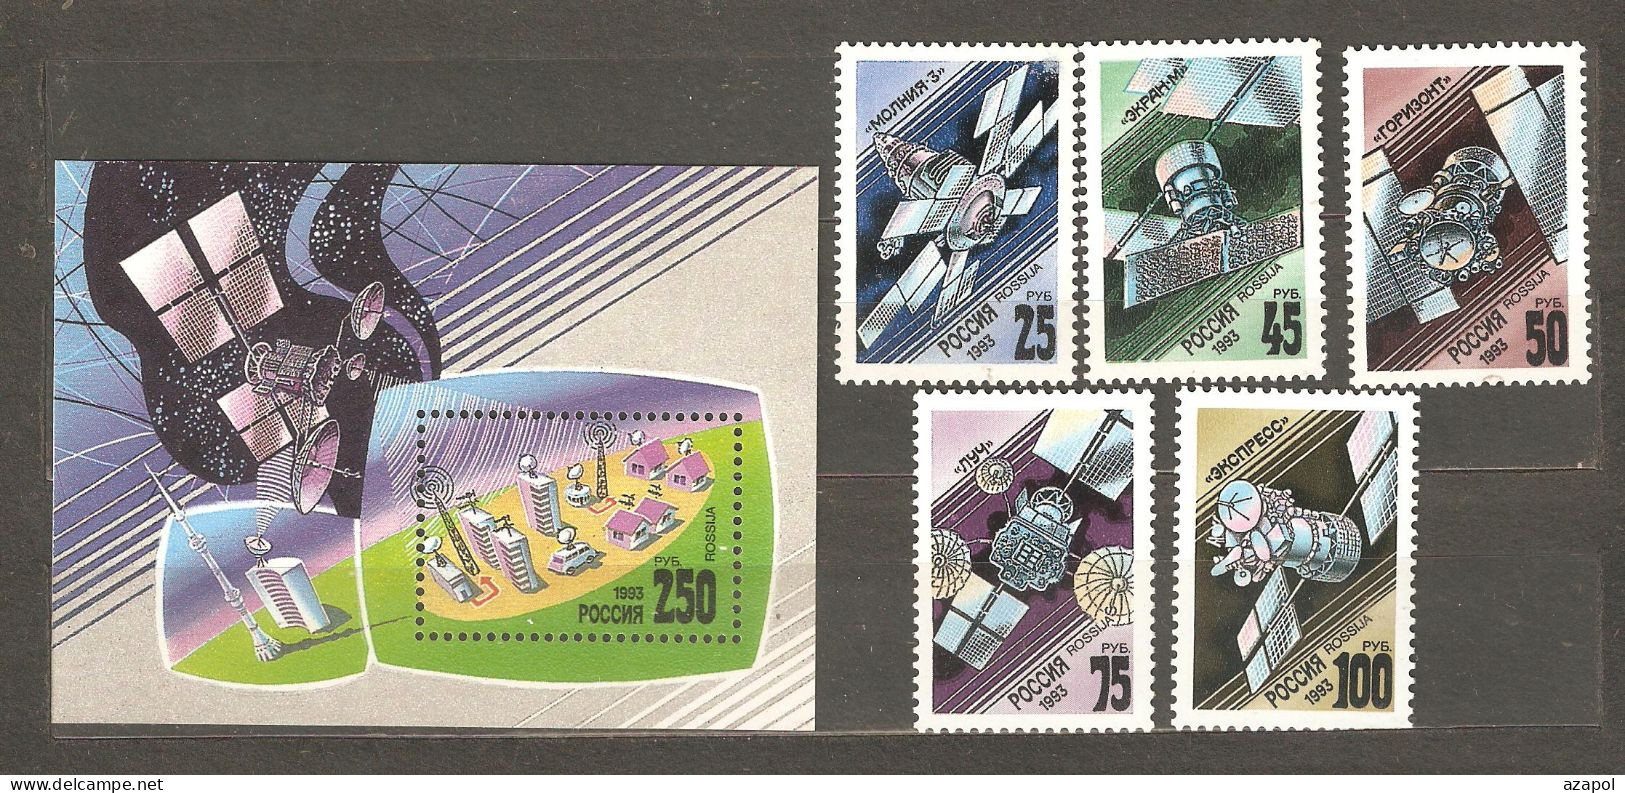 Space: Full Set Of 5 Mint Stamps + Block, Russia, 1993, Mi#301-305, Bl-4, MNH - Russie & URSS